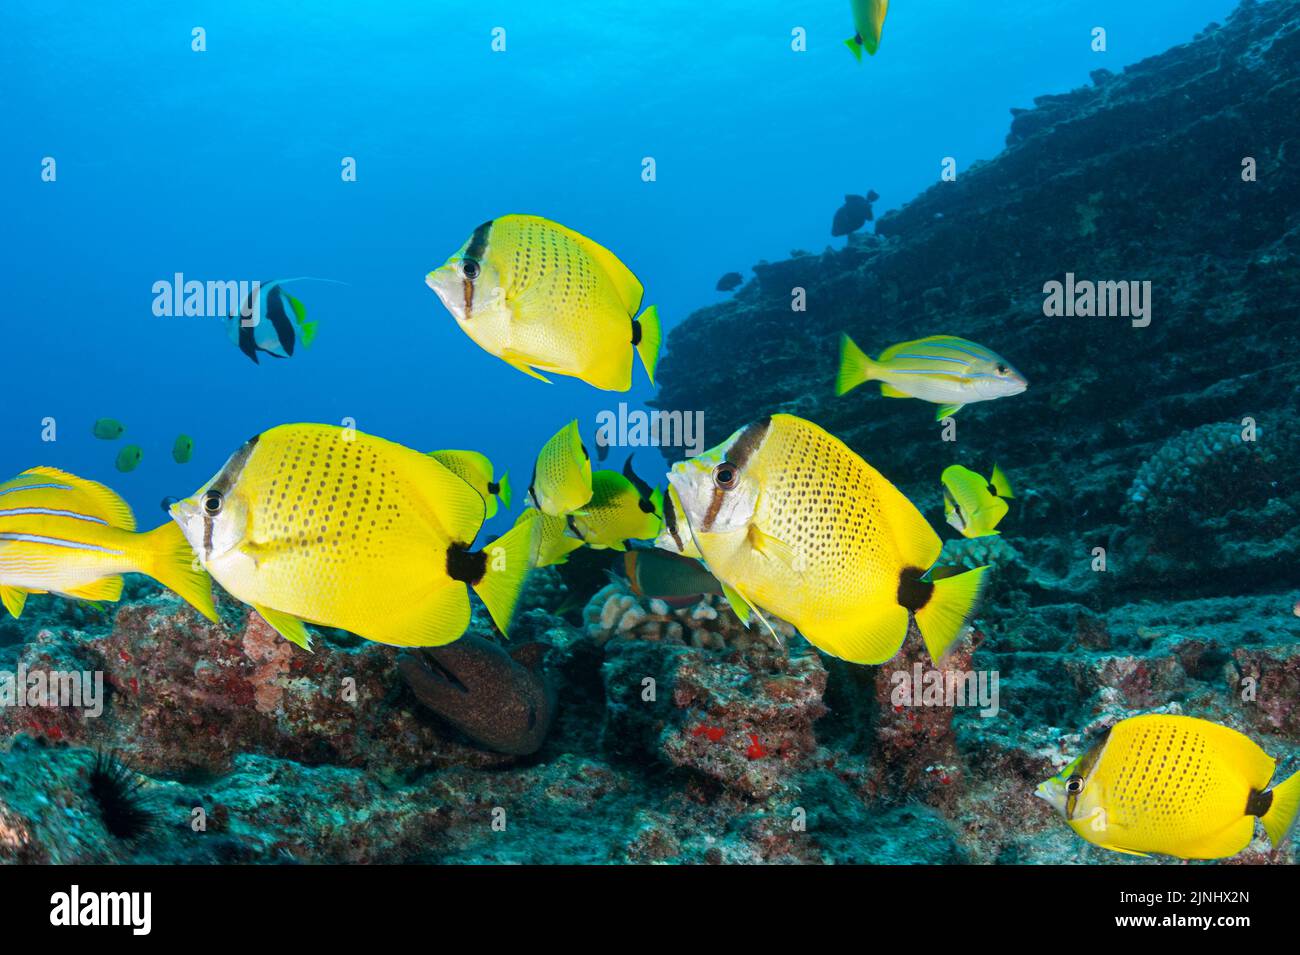 endemic milletseed butterflyfish, Chaetodon miliaris, and other reef fish at Vertical Awareness dive site, Lehua Rock, off Niihau, Hawaii ( Pacific ) Stock Photo